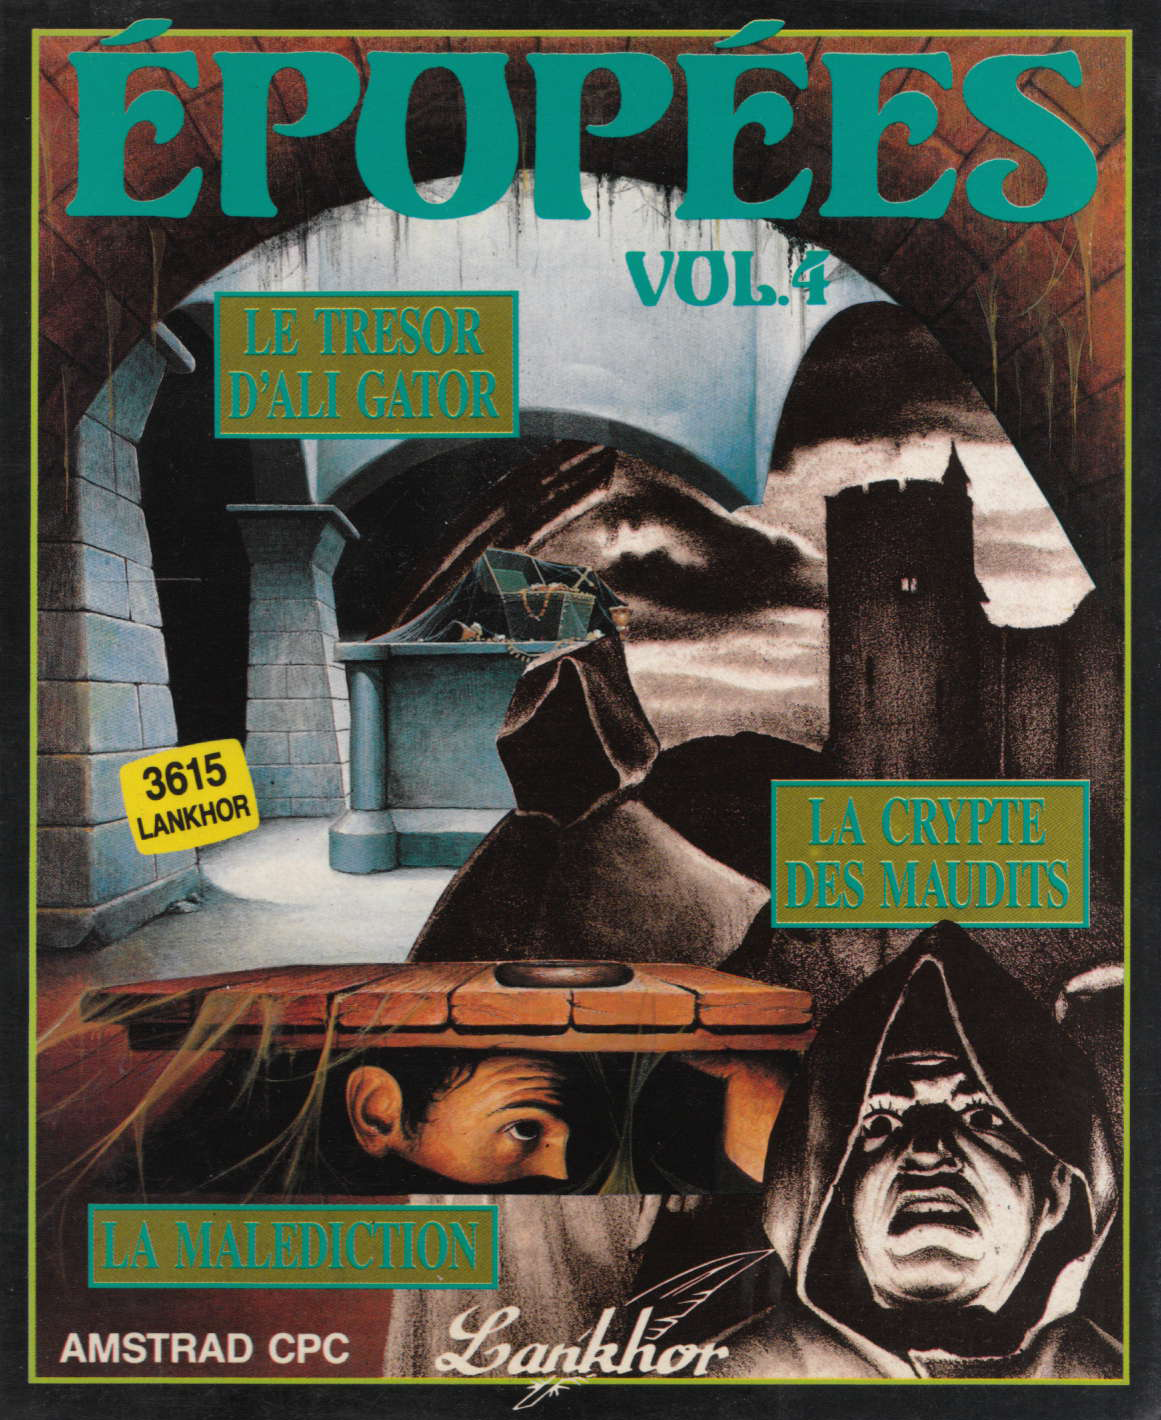 cover of the Amstrad CPC game Epopees Vol. 4  by GameBase CPC